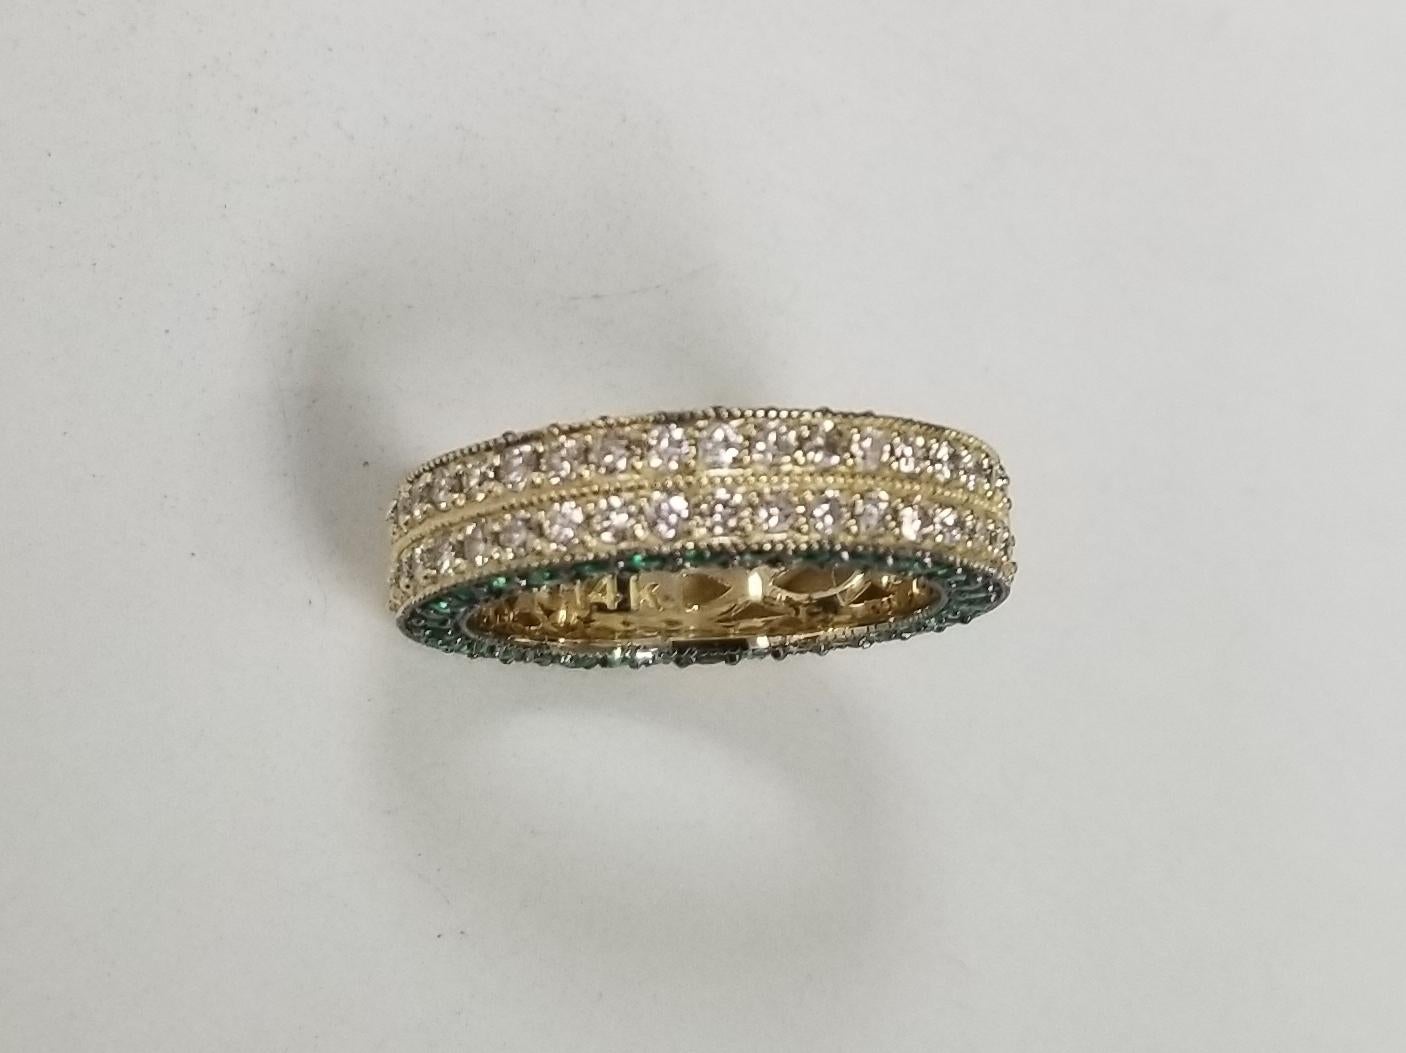 14k white gold ladies 2 row diamond pave eternity ring with diamond-cut emeralds (with black rhodium) pave in the side of the ring, containing 76 round full cut diamonds of very fine quality weighing 1.10cts. and 68 round emeralds weighing 1.20cts.